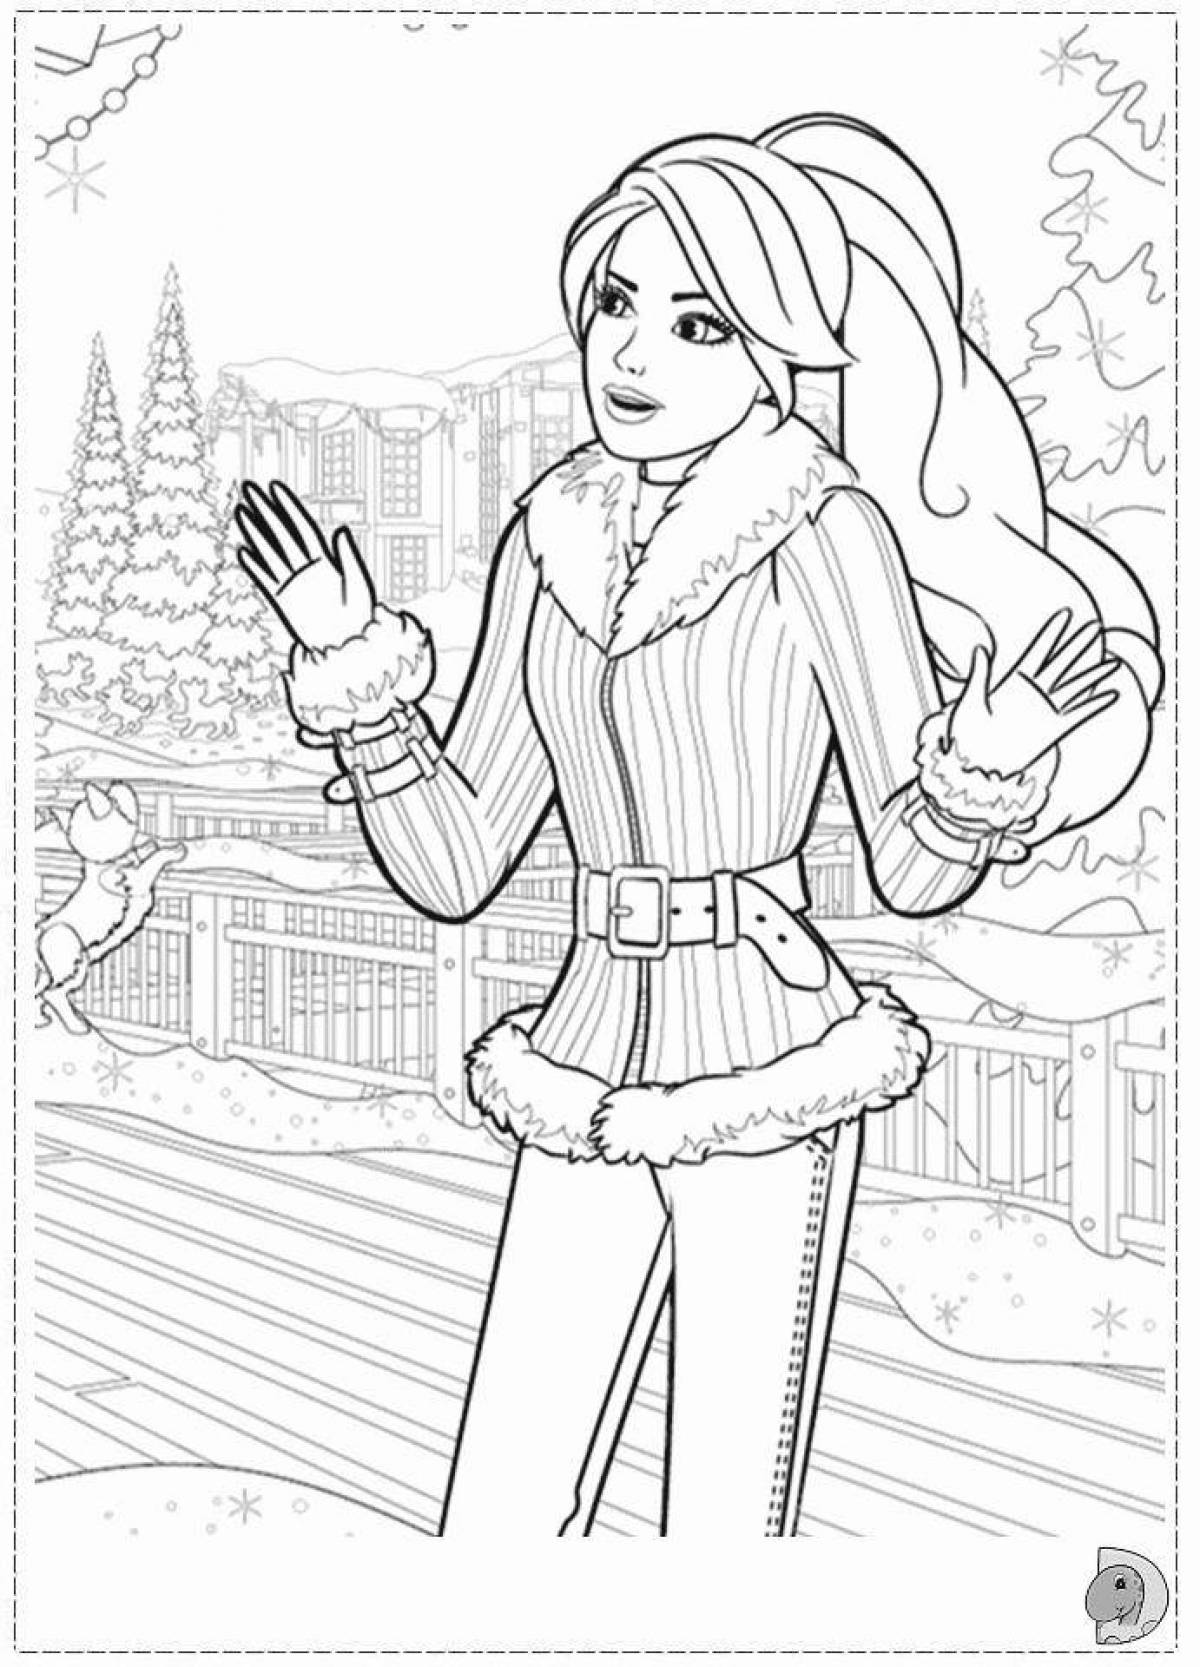 Amazing Barbie Christmas coloring book